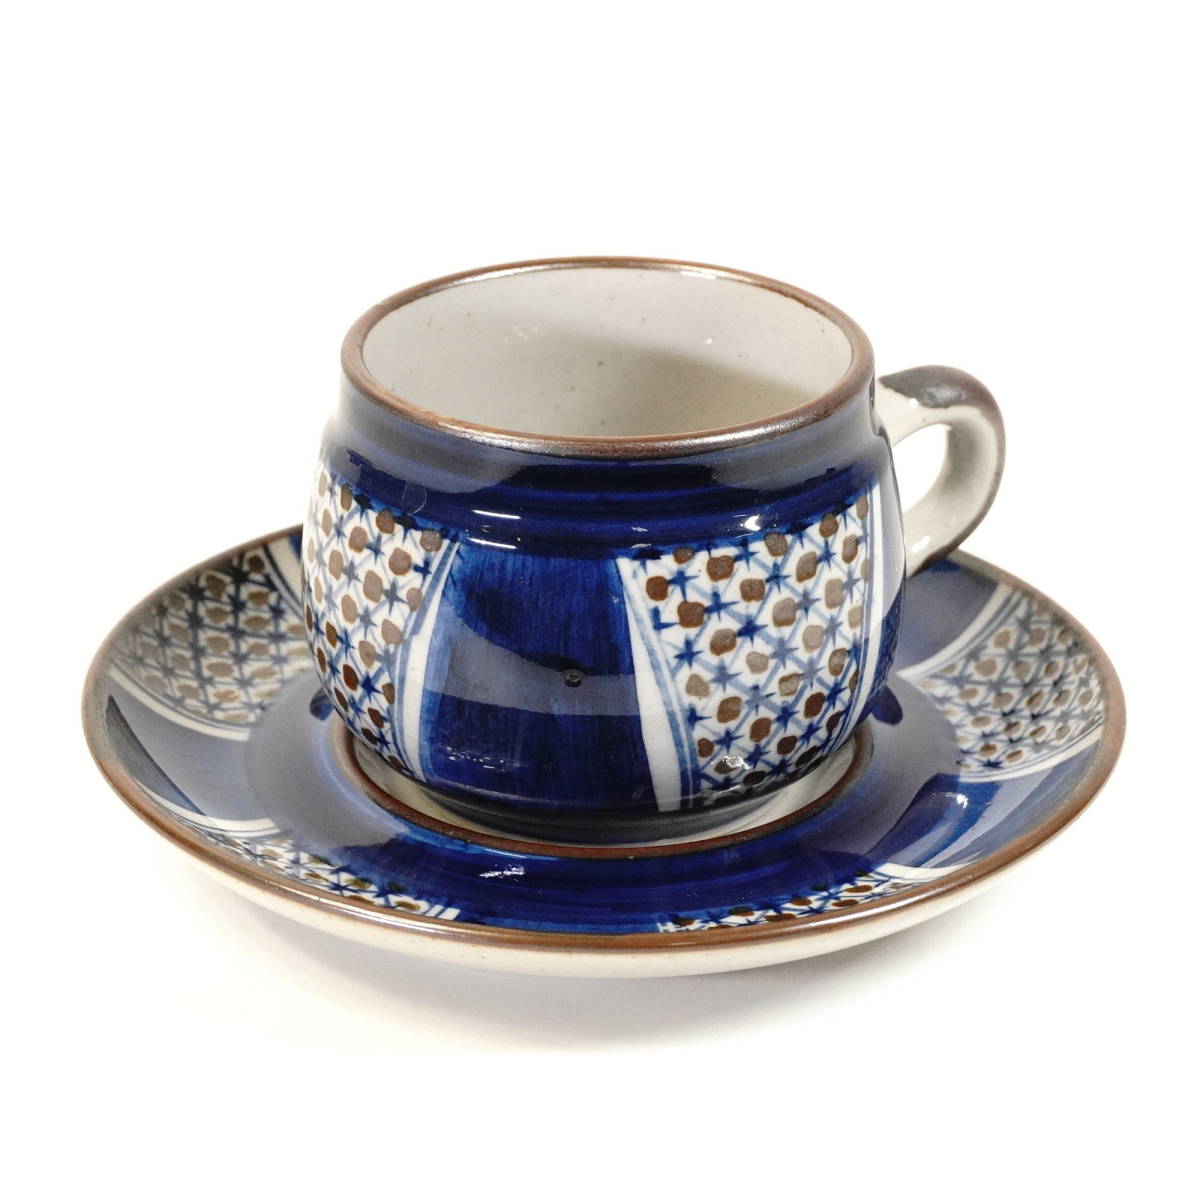 Noritake Noritake Antique Stone cup & saucer 6 customer .. coffee blue . basis style considering . hand .. muffle painting, temperature ... exist feeling of quality. stylish excellent article OSO